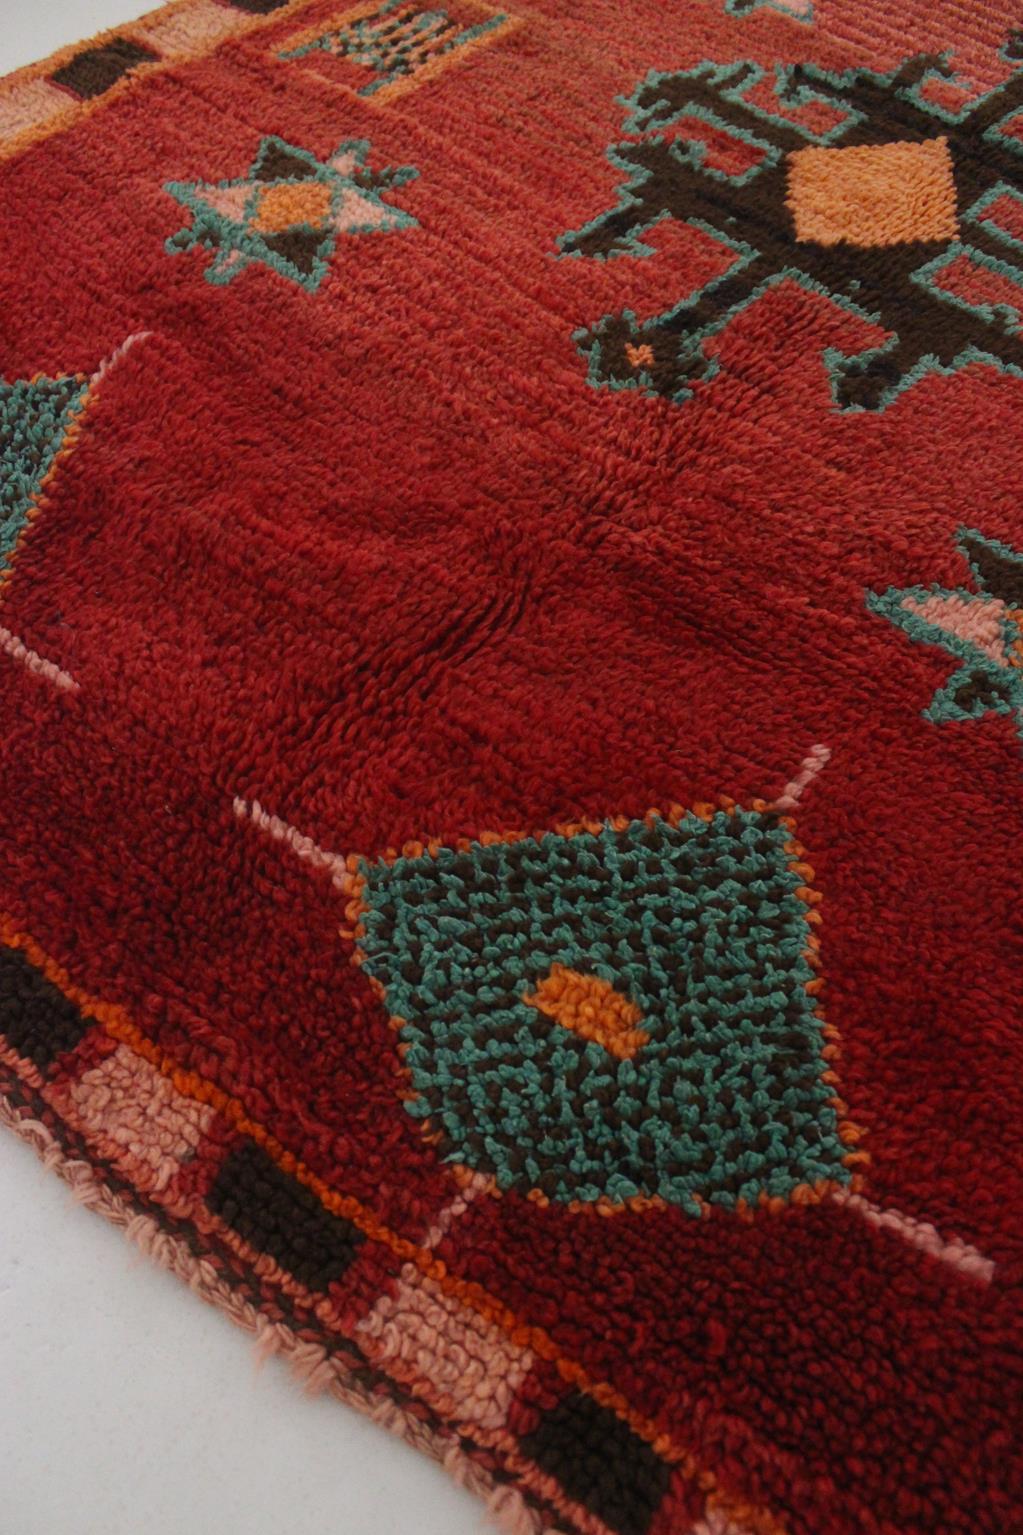 Vintage Moroccan Azilal rug - Red and turquoise - 4.1x5.8feet / 127x177cm In Good Condition For Sale In Marrakech, MA